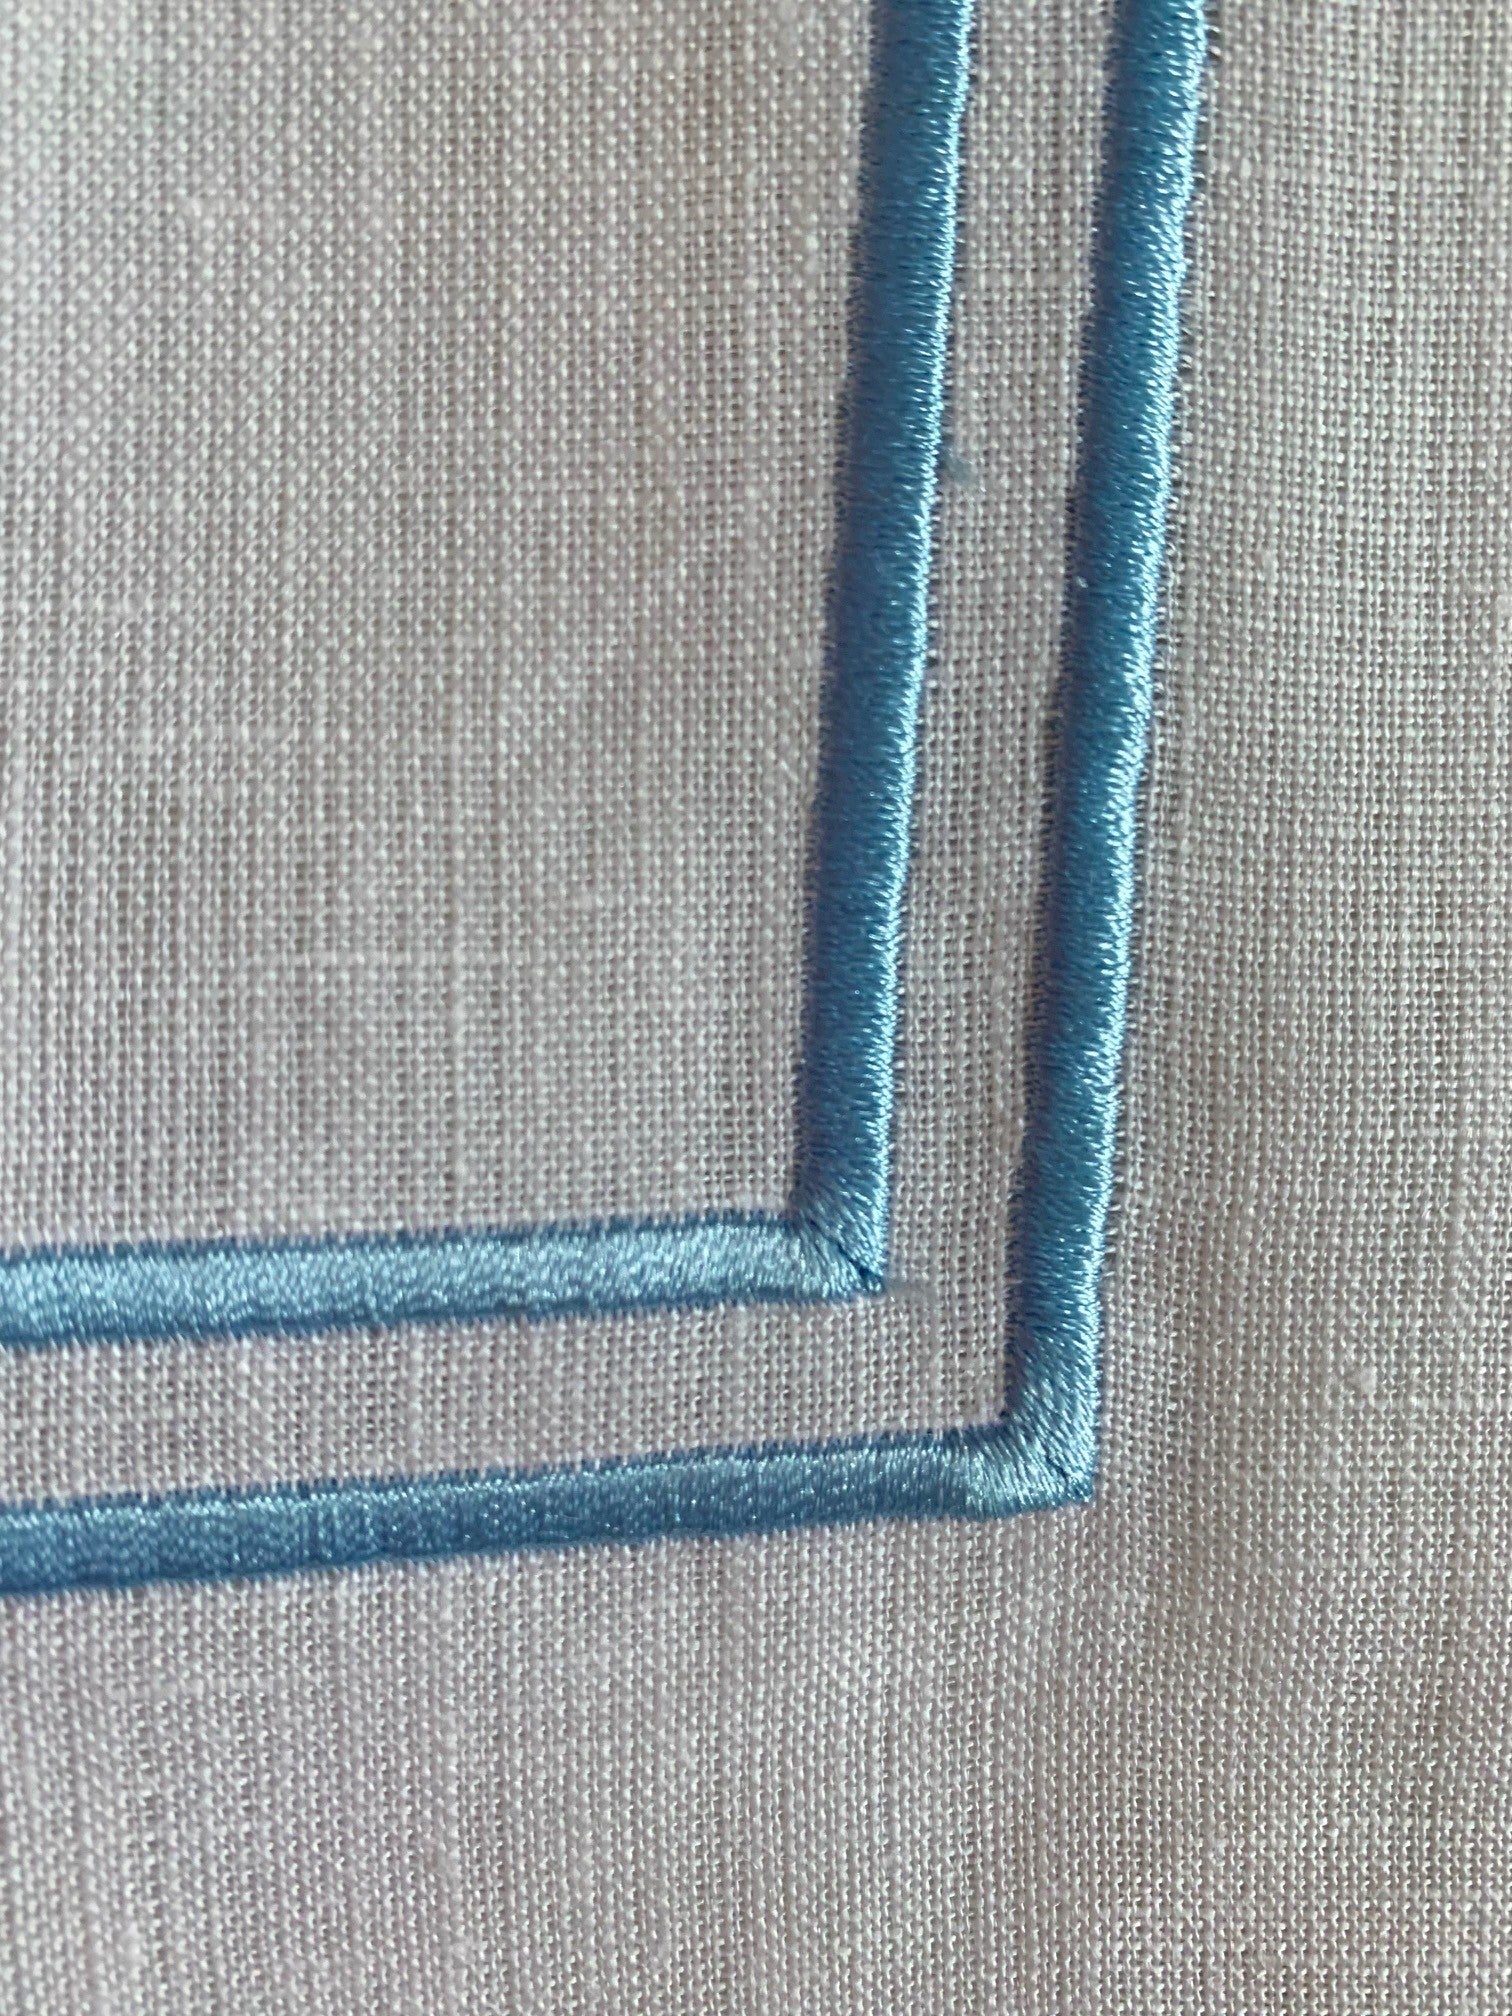 sky blue double piping on a white linen napkin